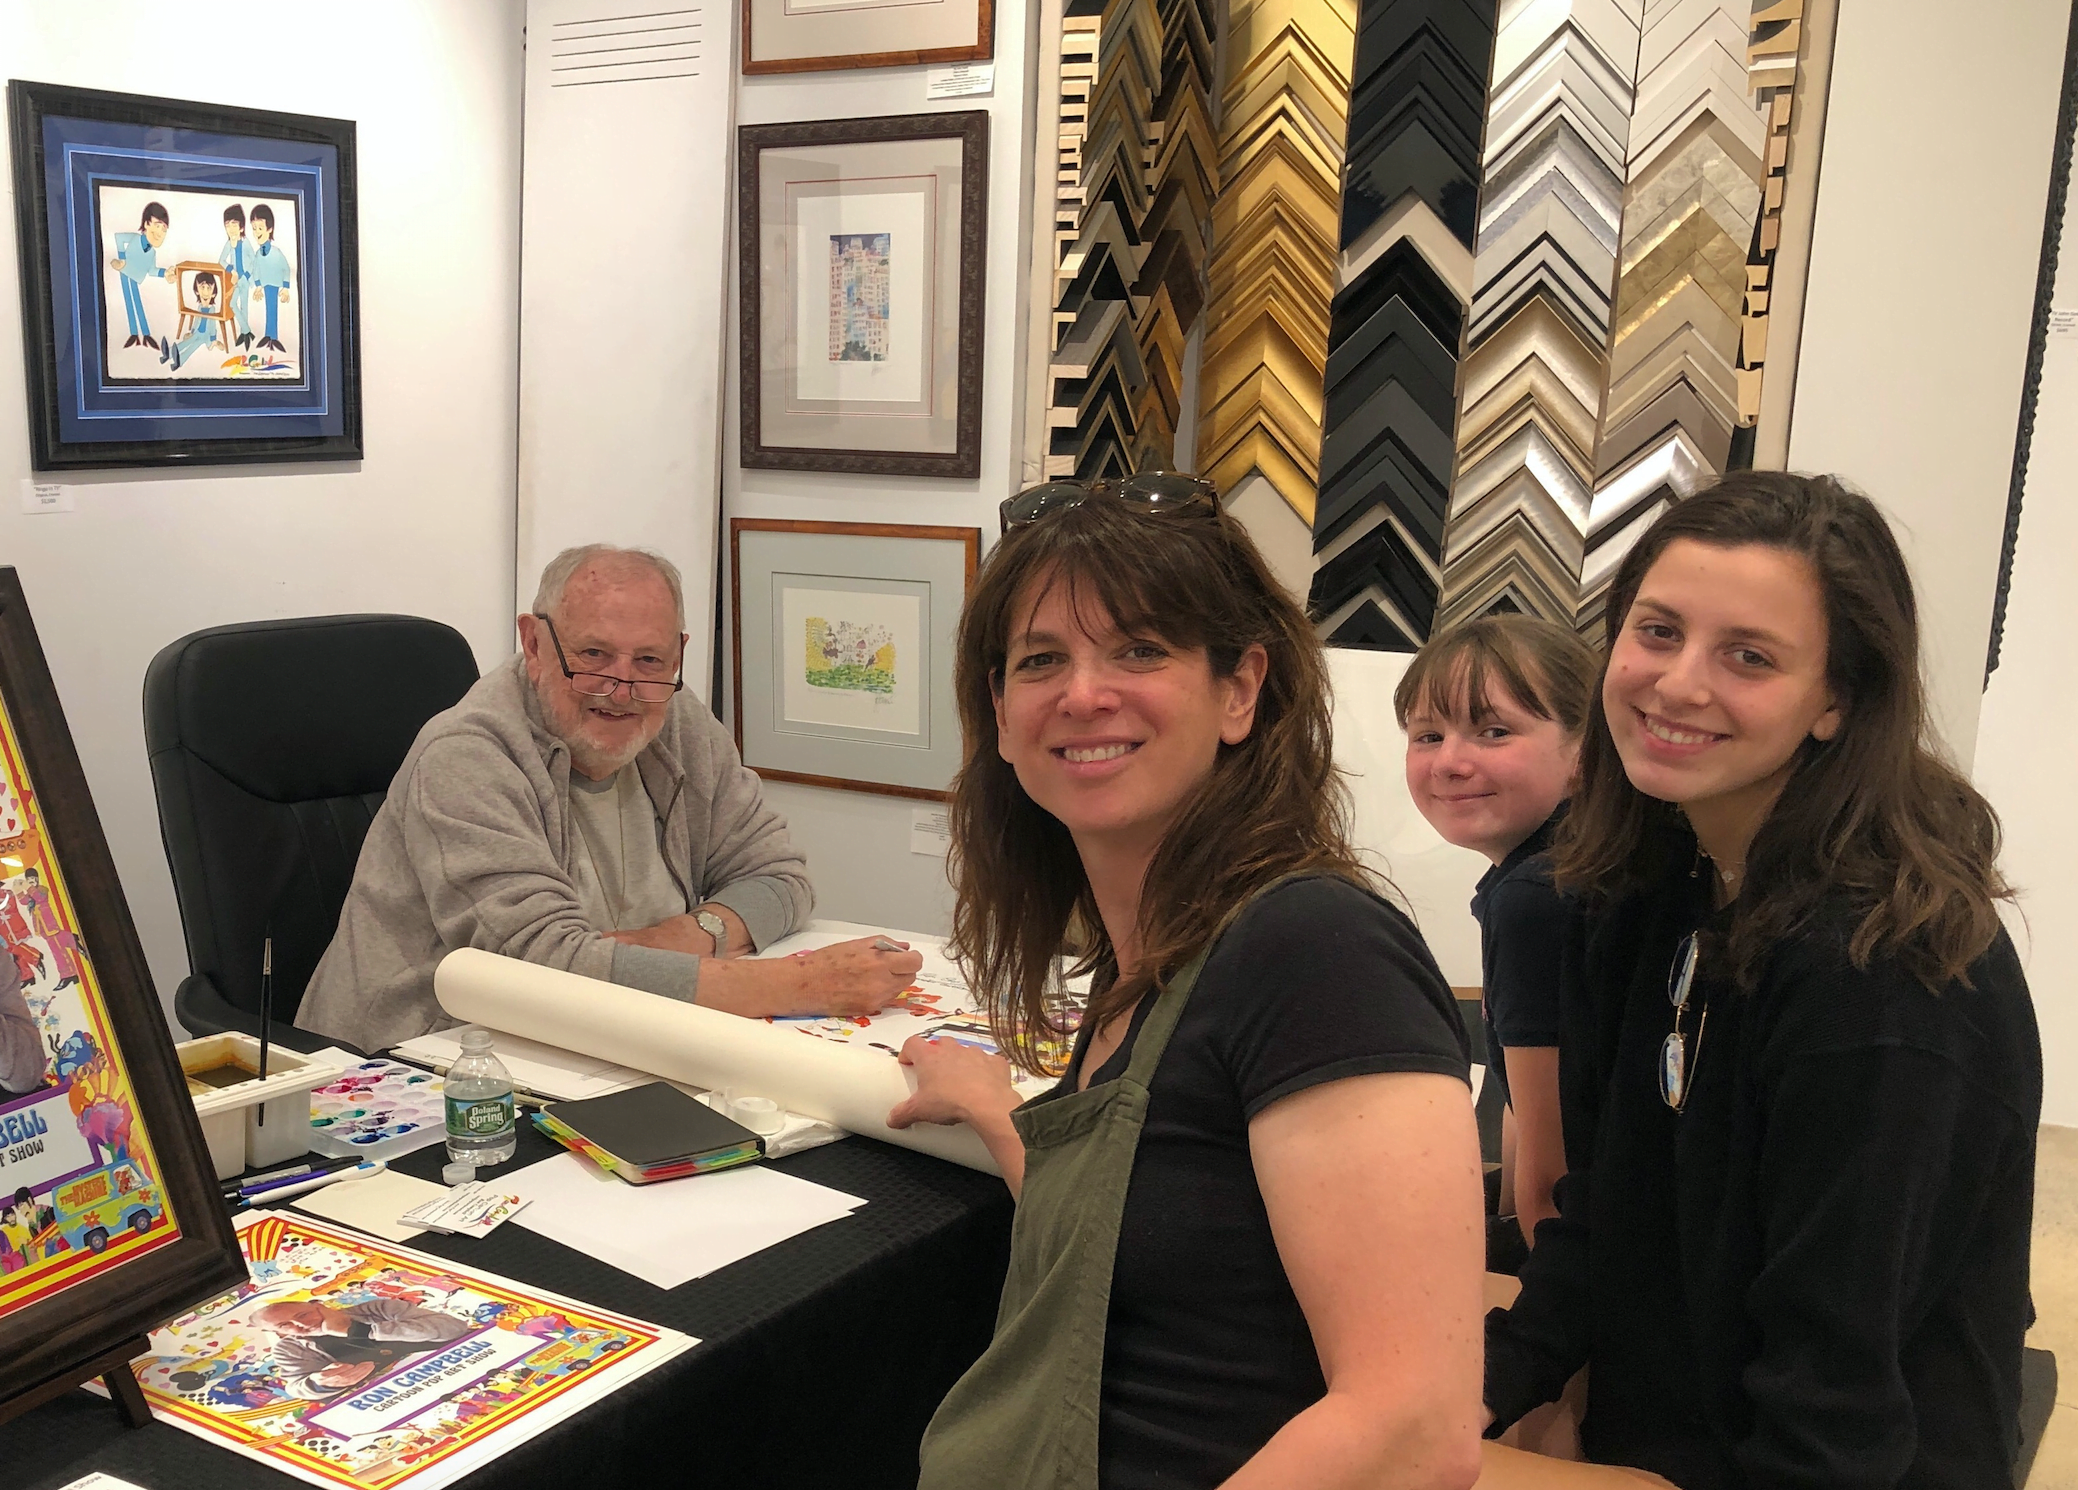 Ron Campbell autographs an original painting with a personalized “childhood memory” for Joli Gross and daughters Ellie and Cami at C. Parker Gallery’s pop art show in Greenwich. Photo: Heather Brown